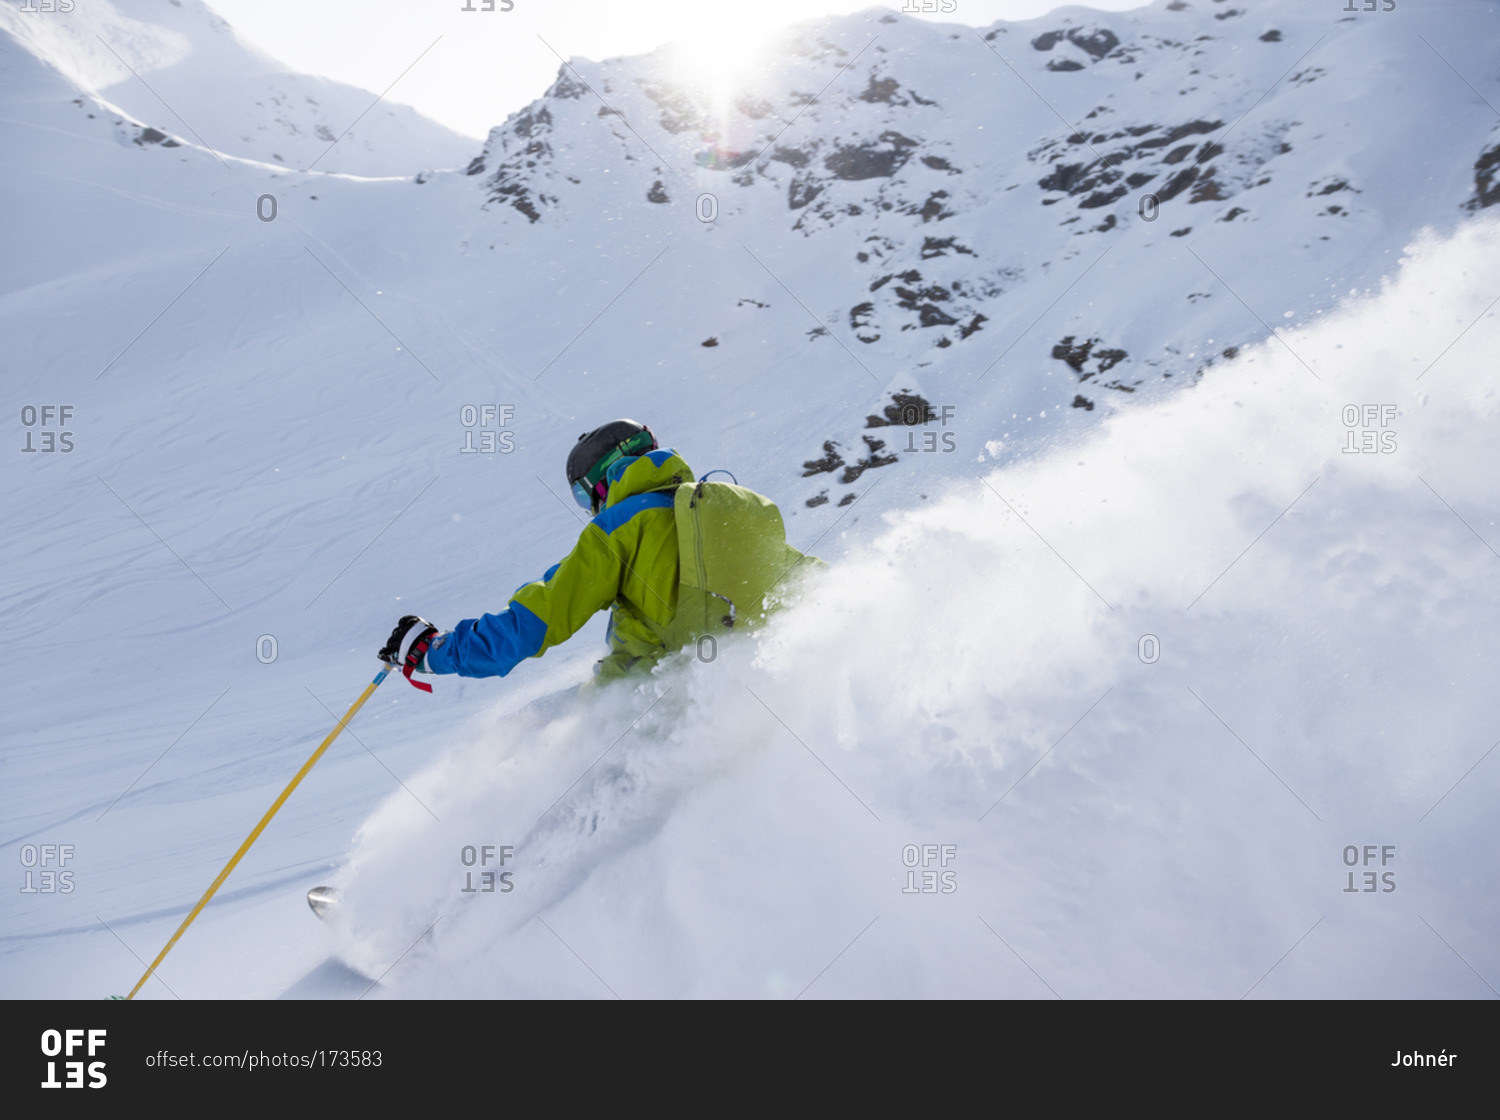 Man backcountry skiing on a snowy slope